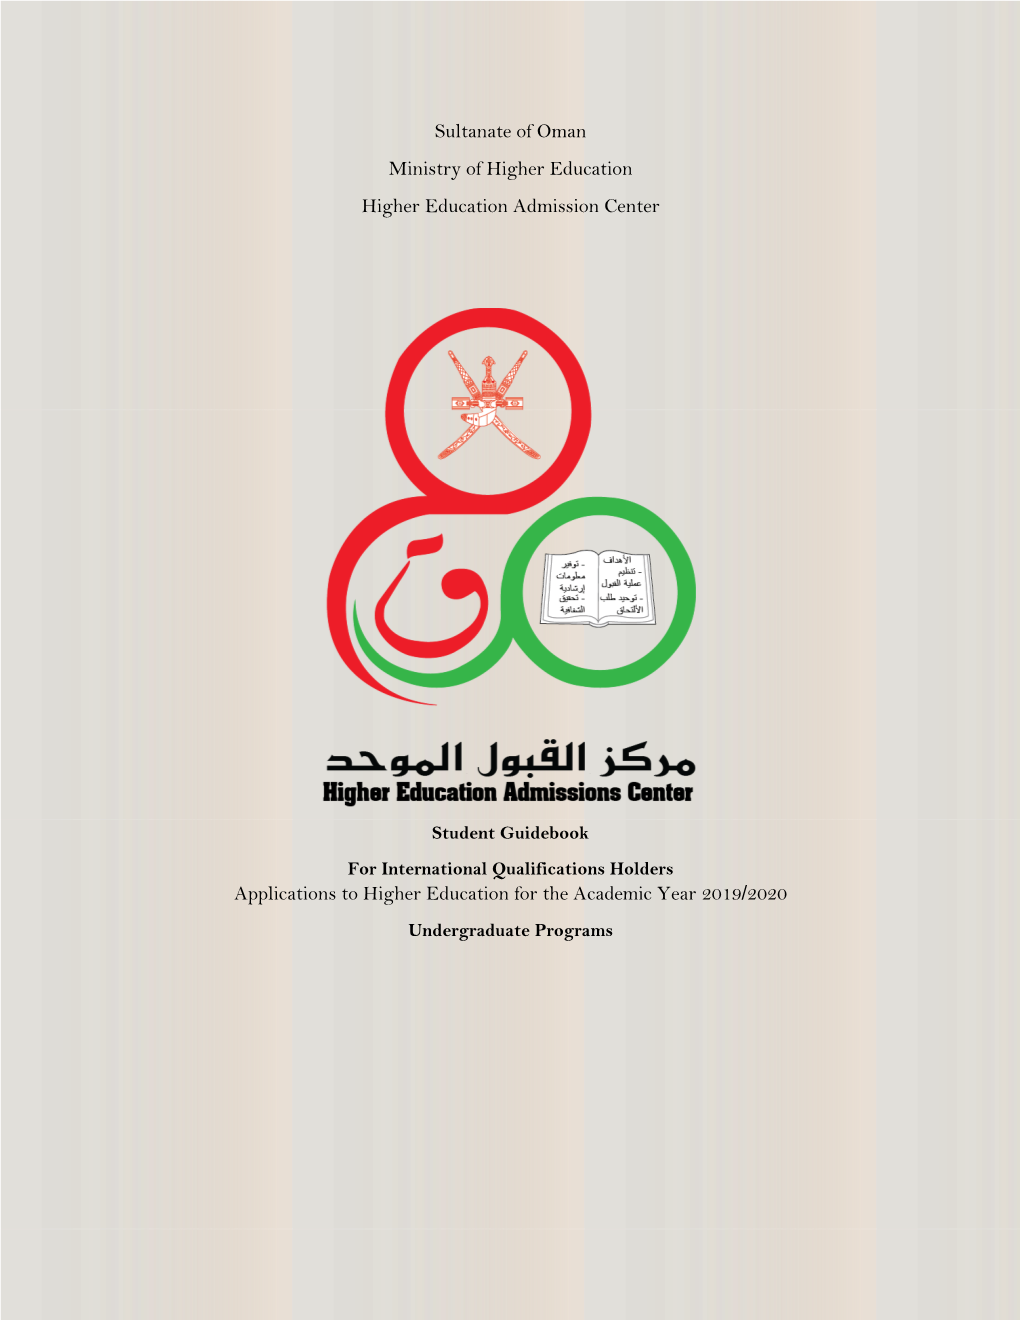 Sultanate of Oman Ministry of Higher Education Higher Education Admission Center